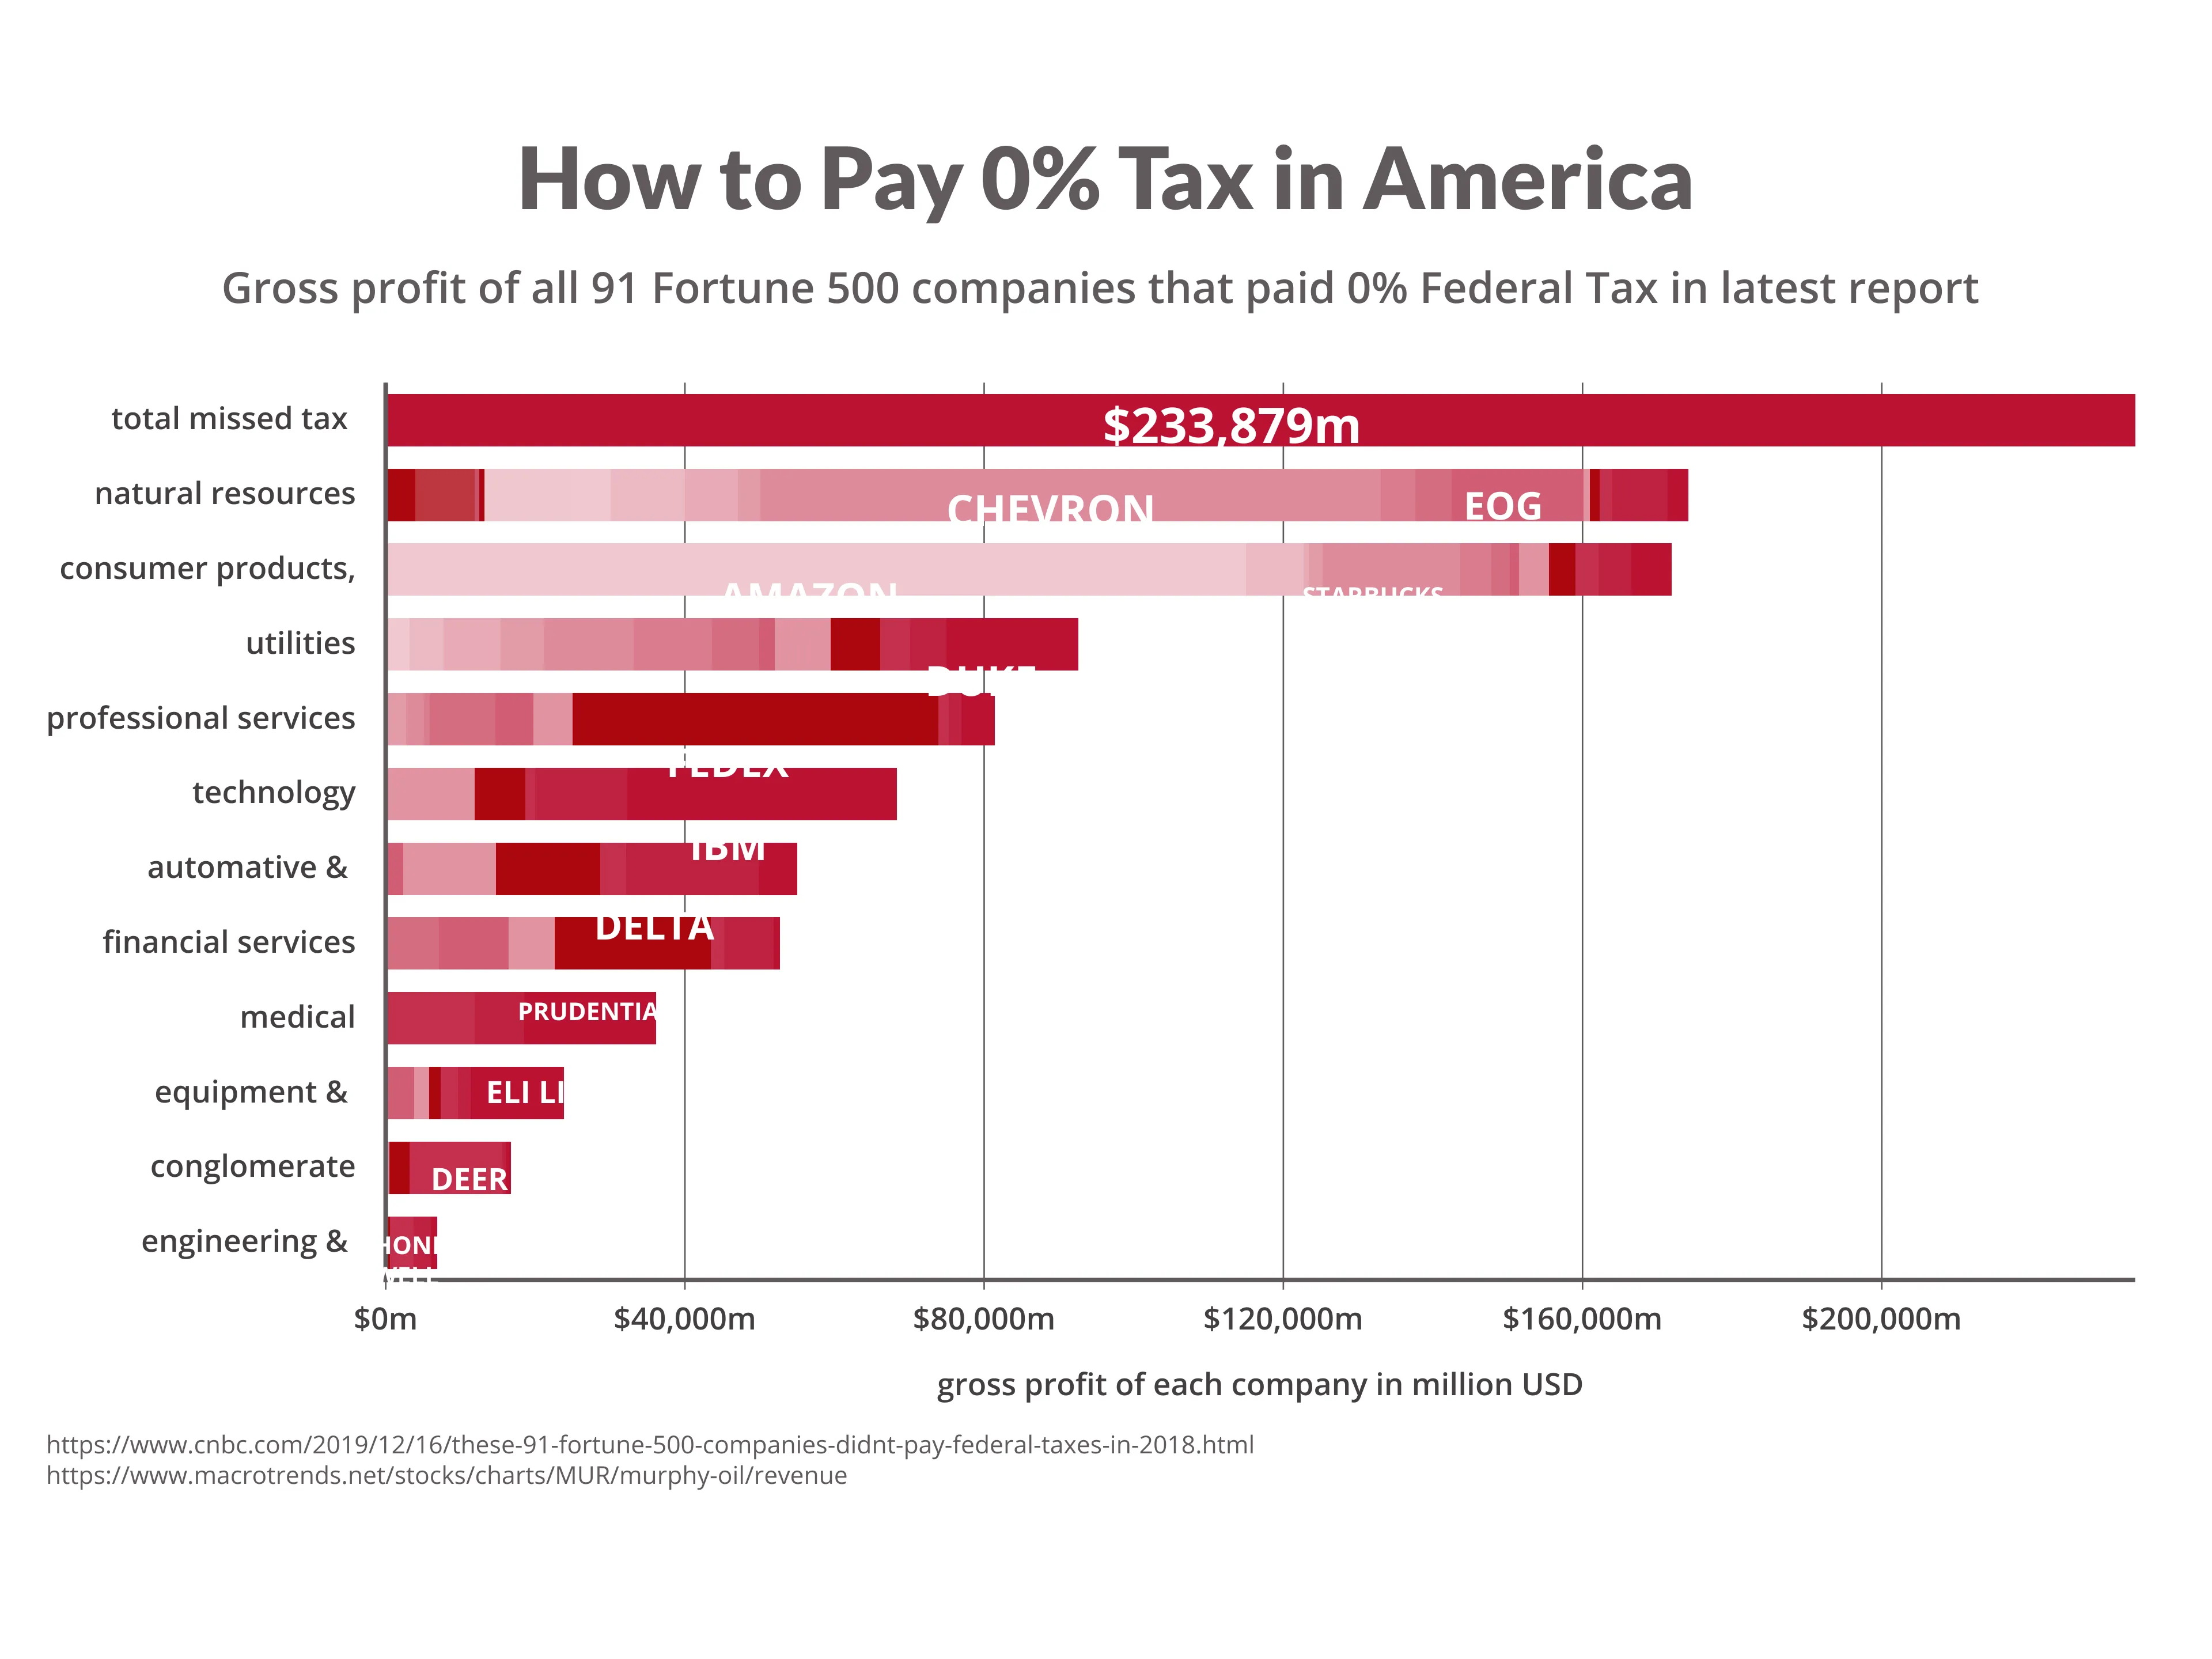 How to Pay 0% Tax in America